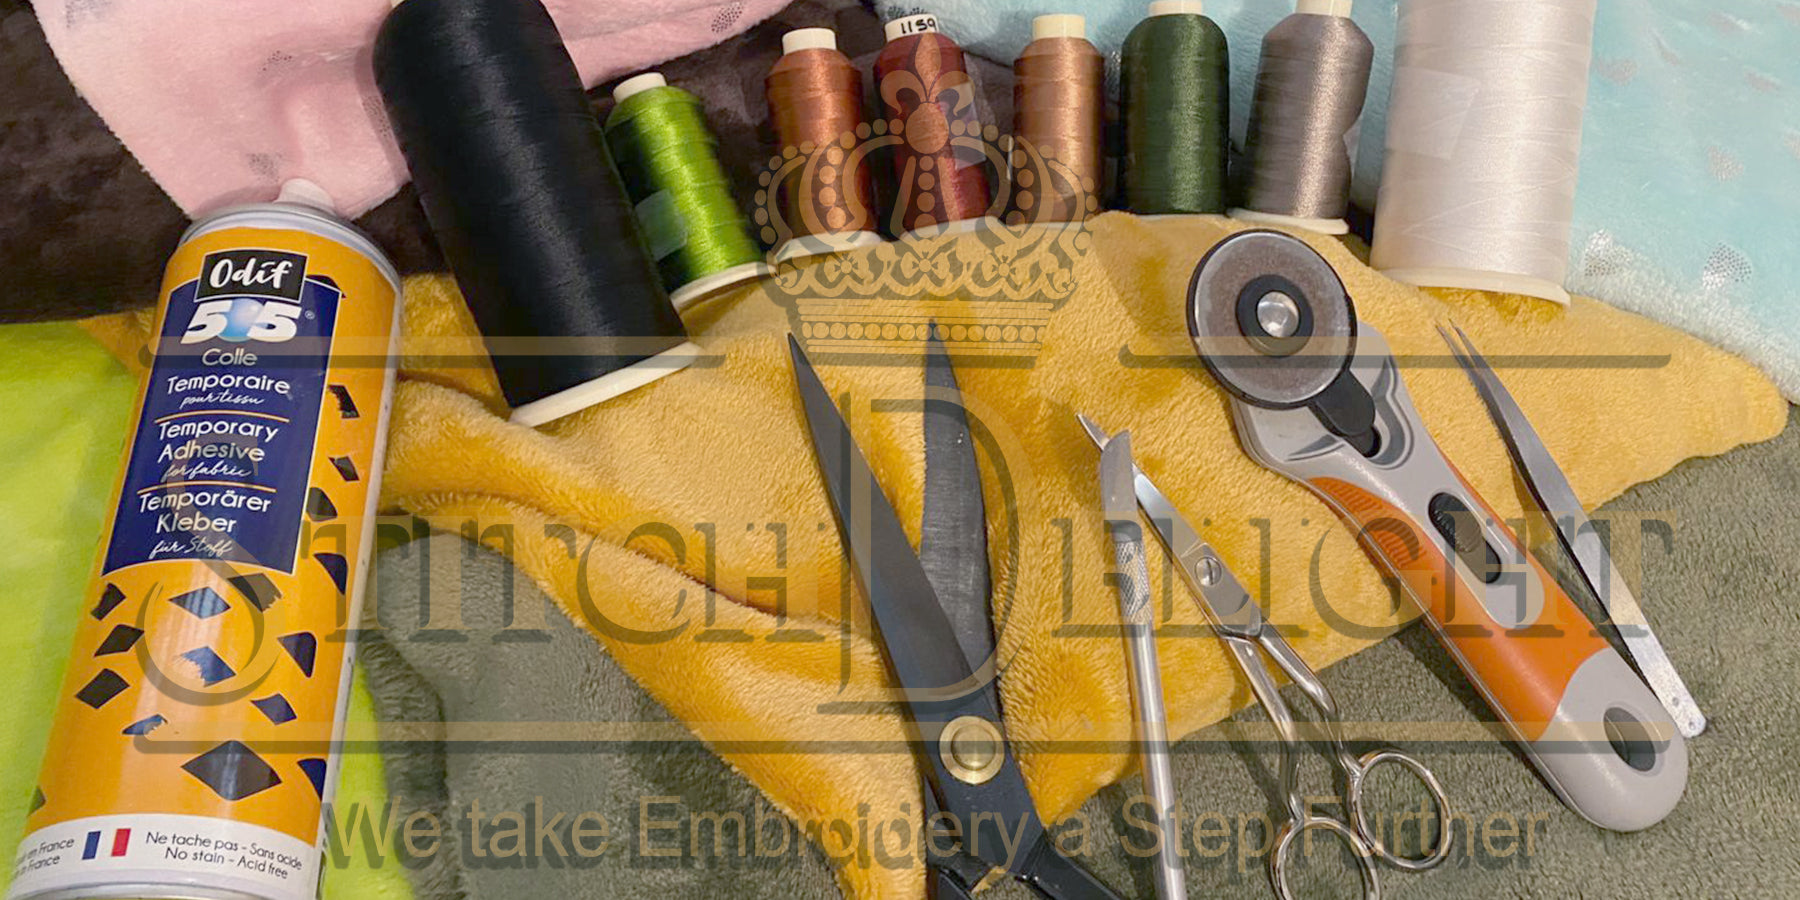 A quick Guide on getting Started with Machine Embroidery